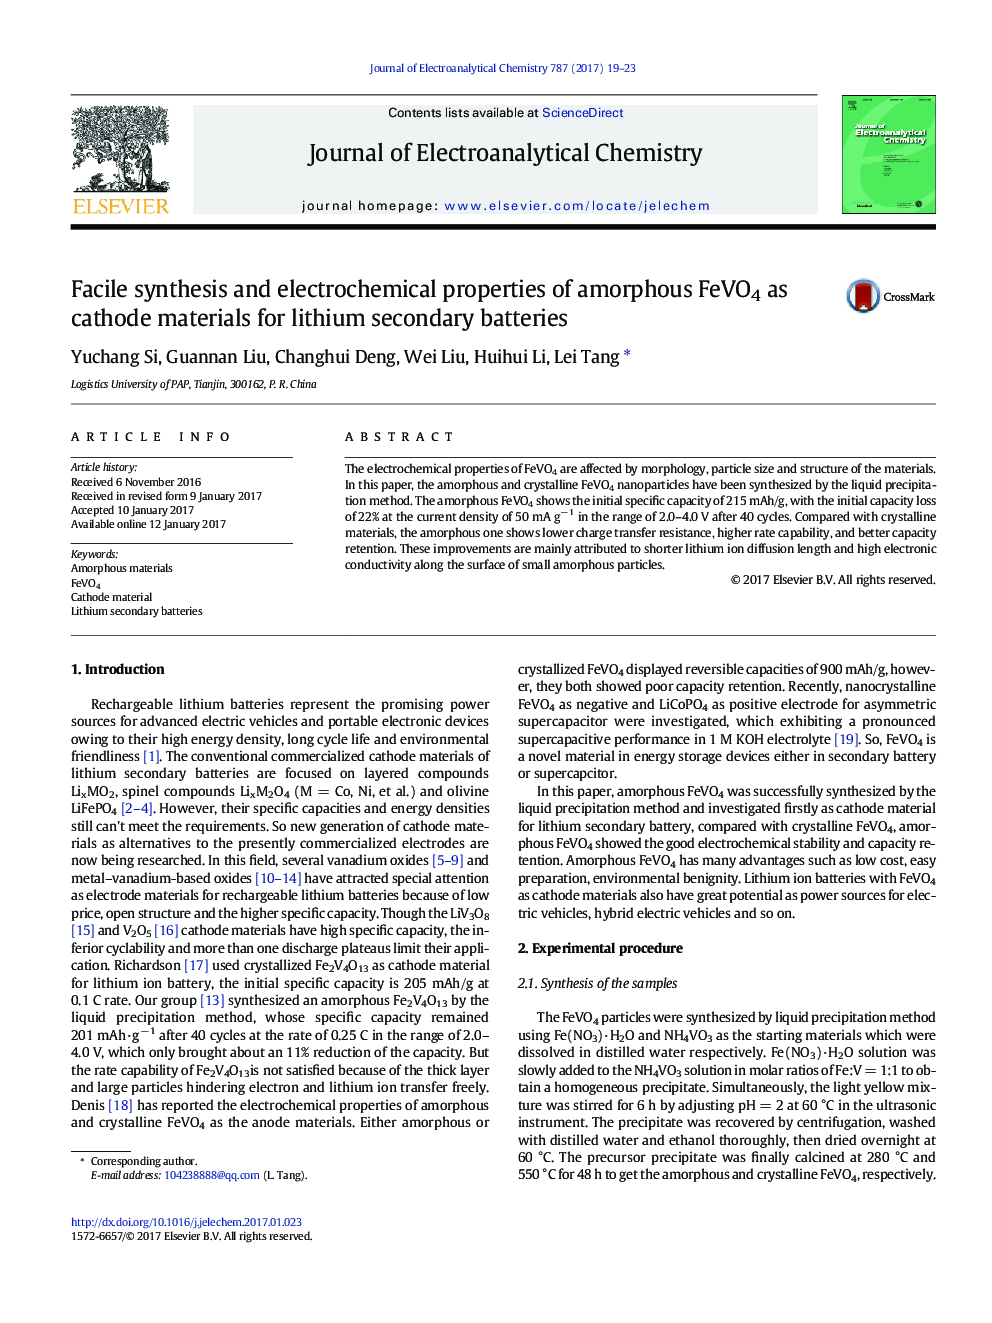 Facile synthesis and electrochemical properties of amorphous FeVO4 as cathode materials for lithium secondary batteries